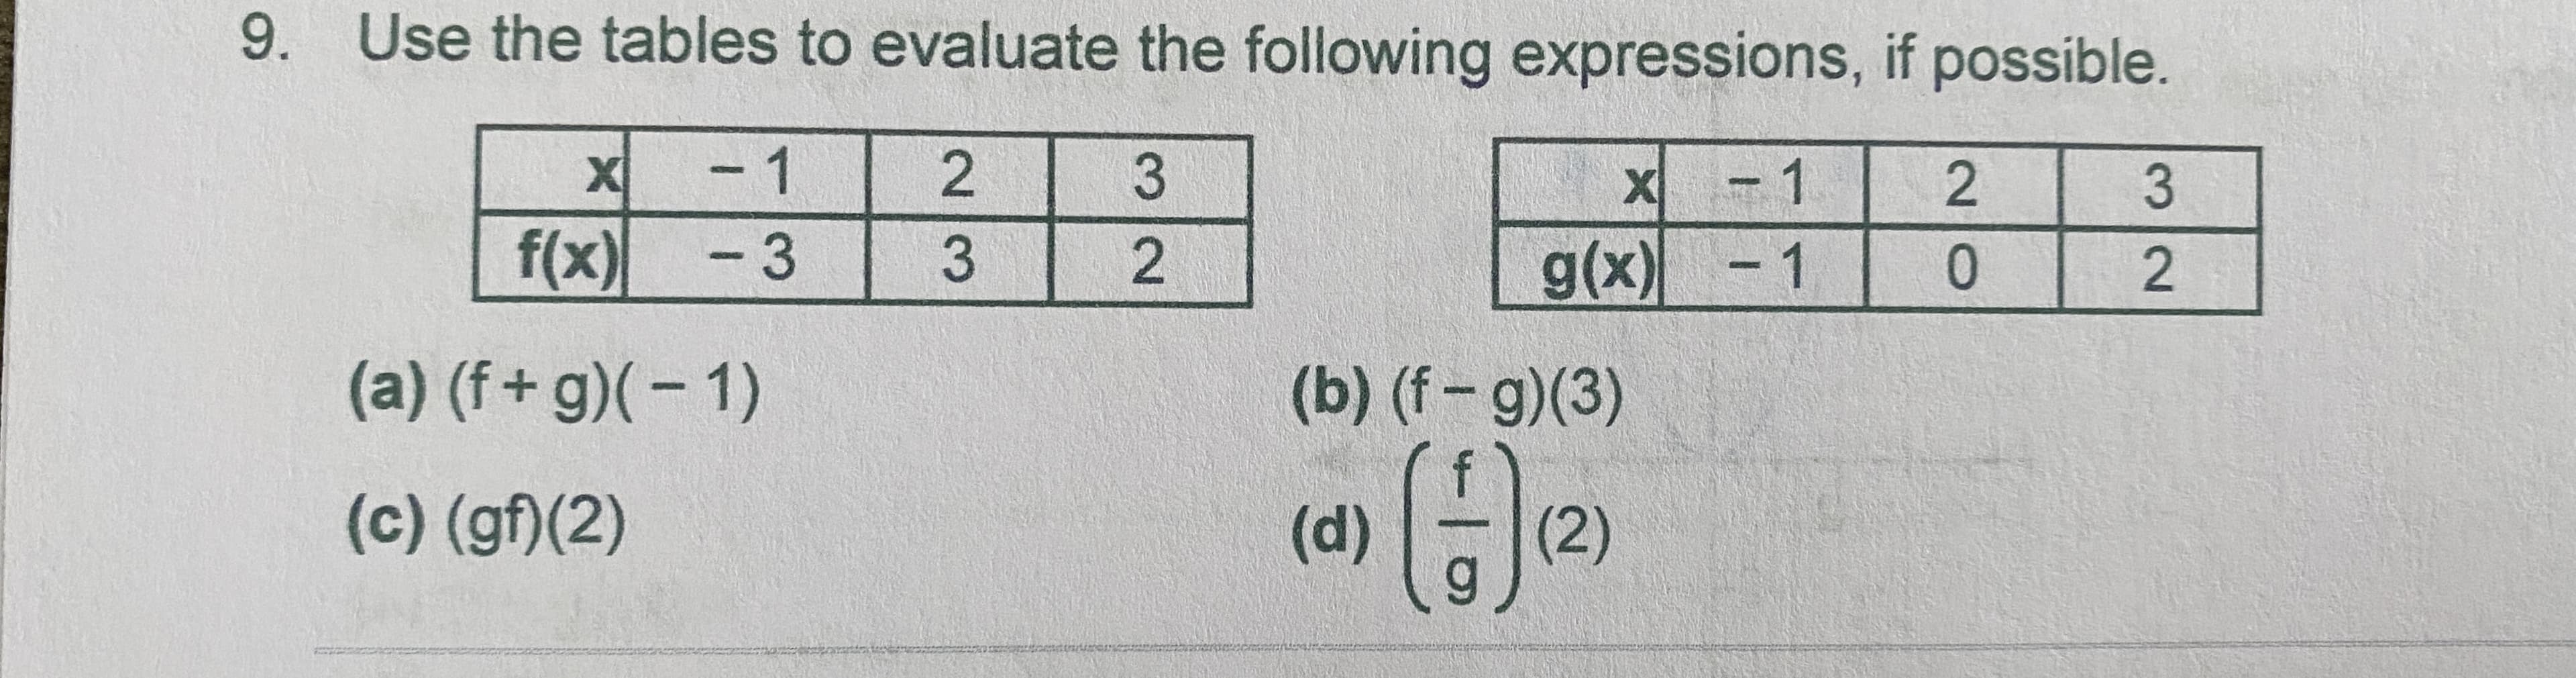 9. Use the tables to evaluate the following expressions, if possible.
- 1
2.
f(x)
-3
g(x)-1
(a) (f+ g)(- 1)
(b) (f-g)(3)
(c) (gf)(2)
(2)
(e)
